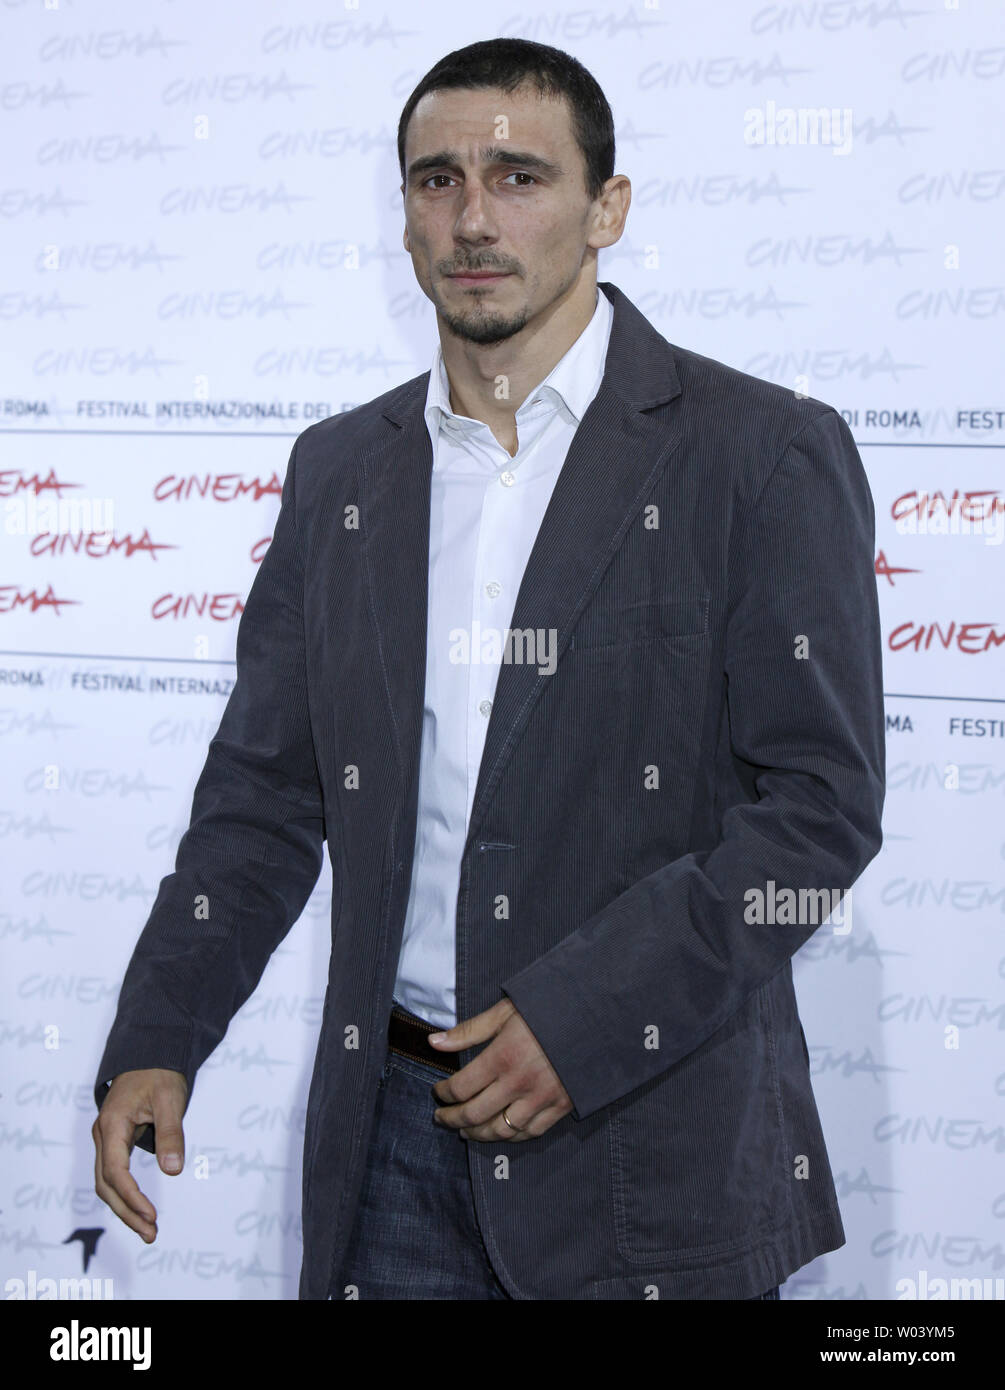 Alessandro Angelini arrives at a photocall for the film 'Alza la testa (Raise Your Head)' during the 4th Rome International Film Festival in Rome on October 18, 2009.   UPI Photo/David Silpa Stock Photo